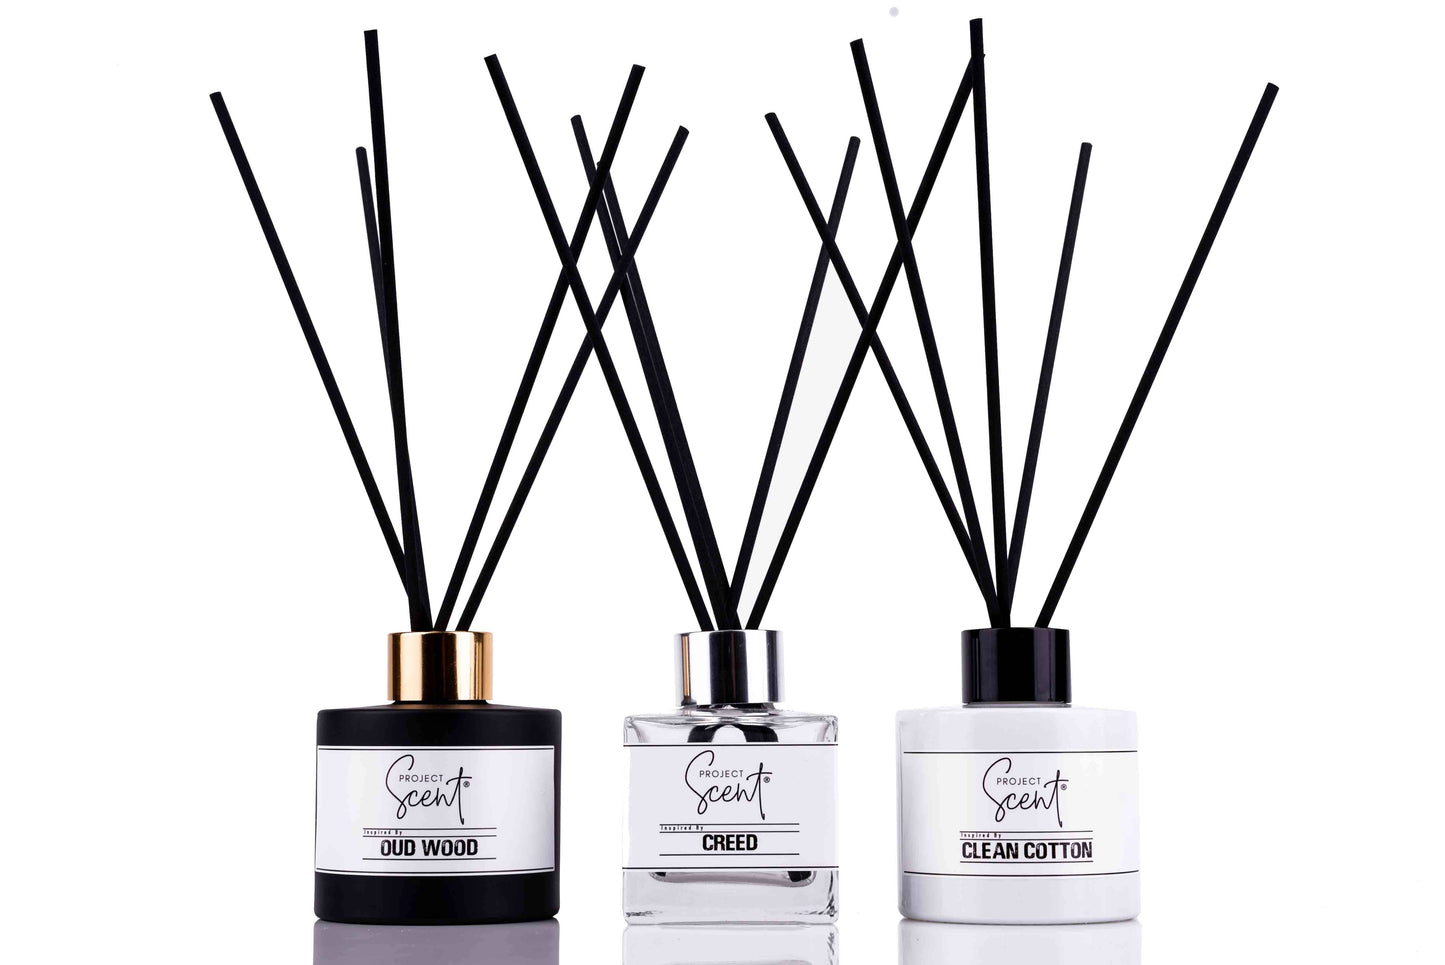 Daisy Inspired Reed Diffuser 100ml